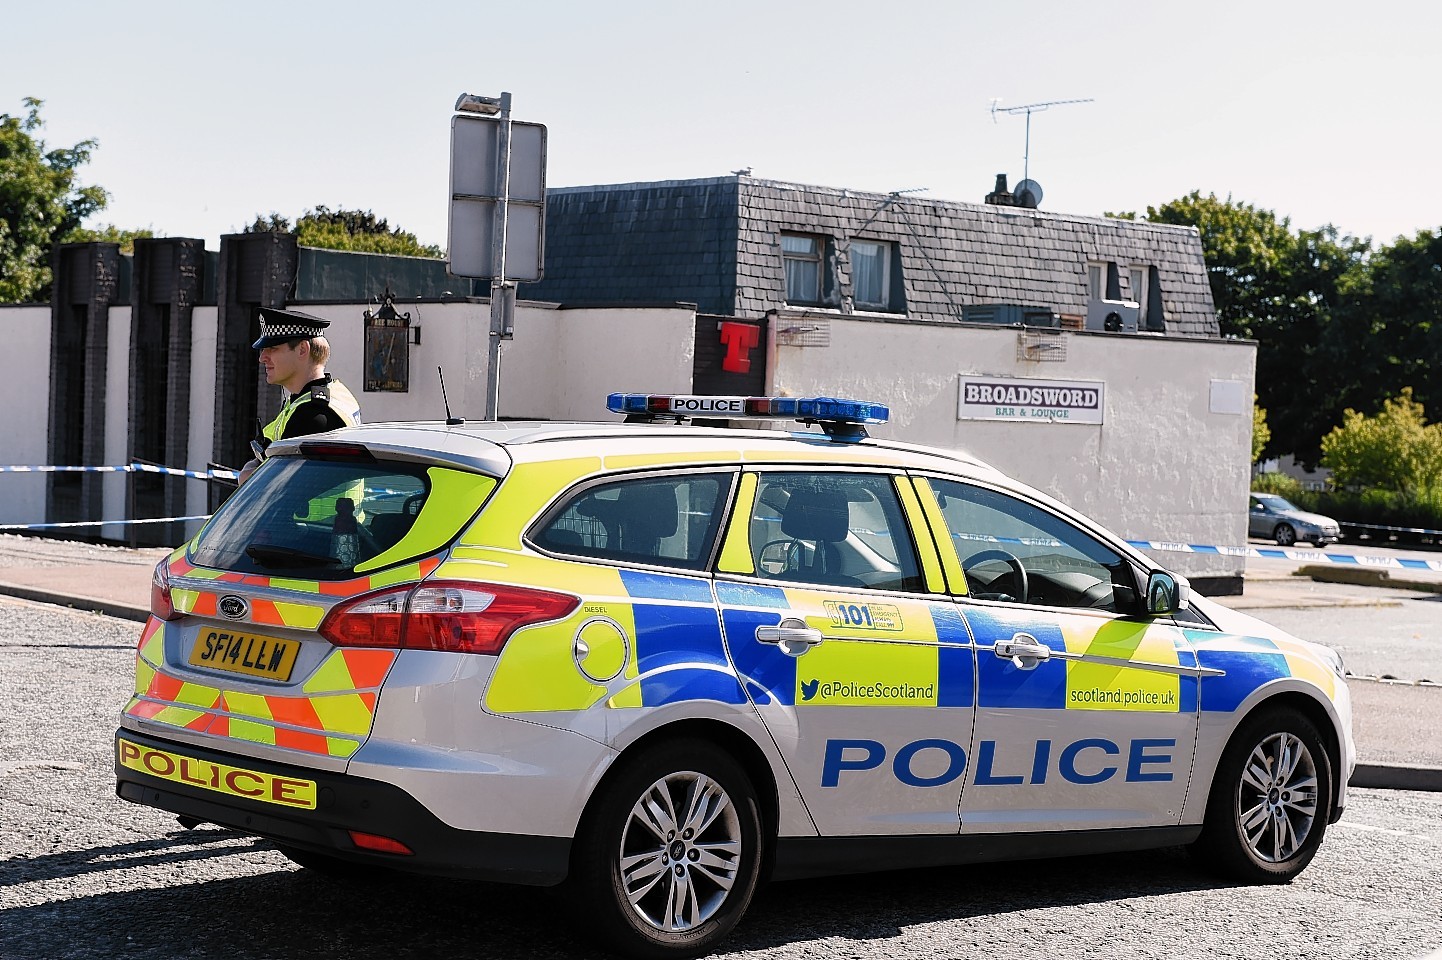 Three people are in hospital following a stabbing outside the Broadsword Bar, Hayton Road in Tillydrone, Aberdeen